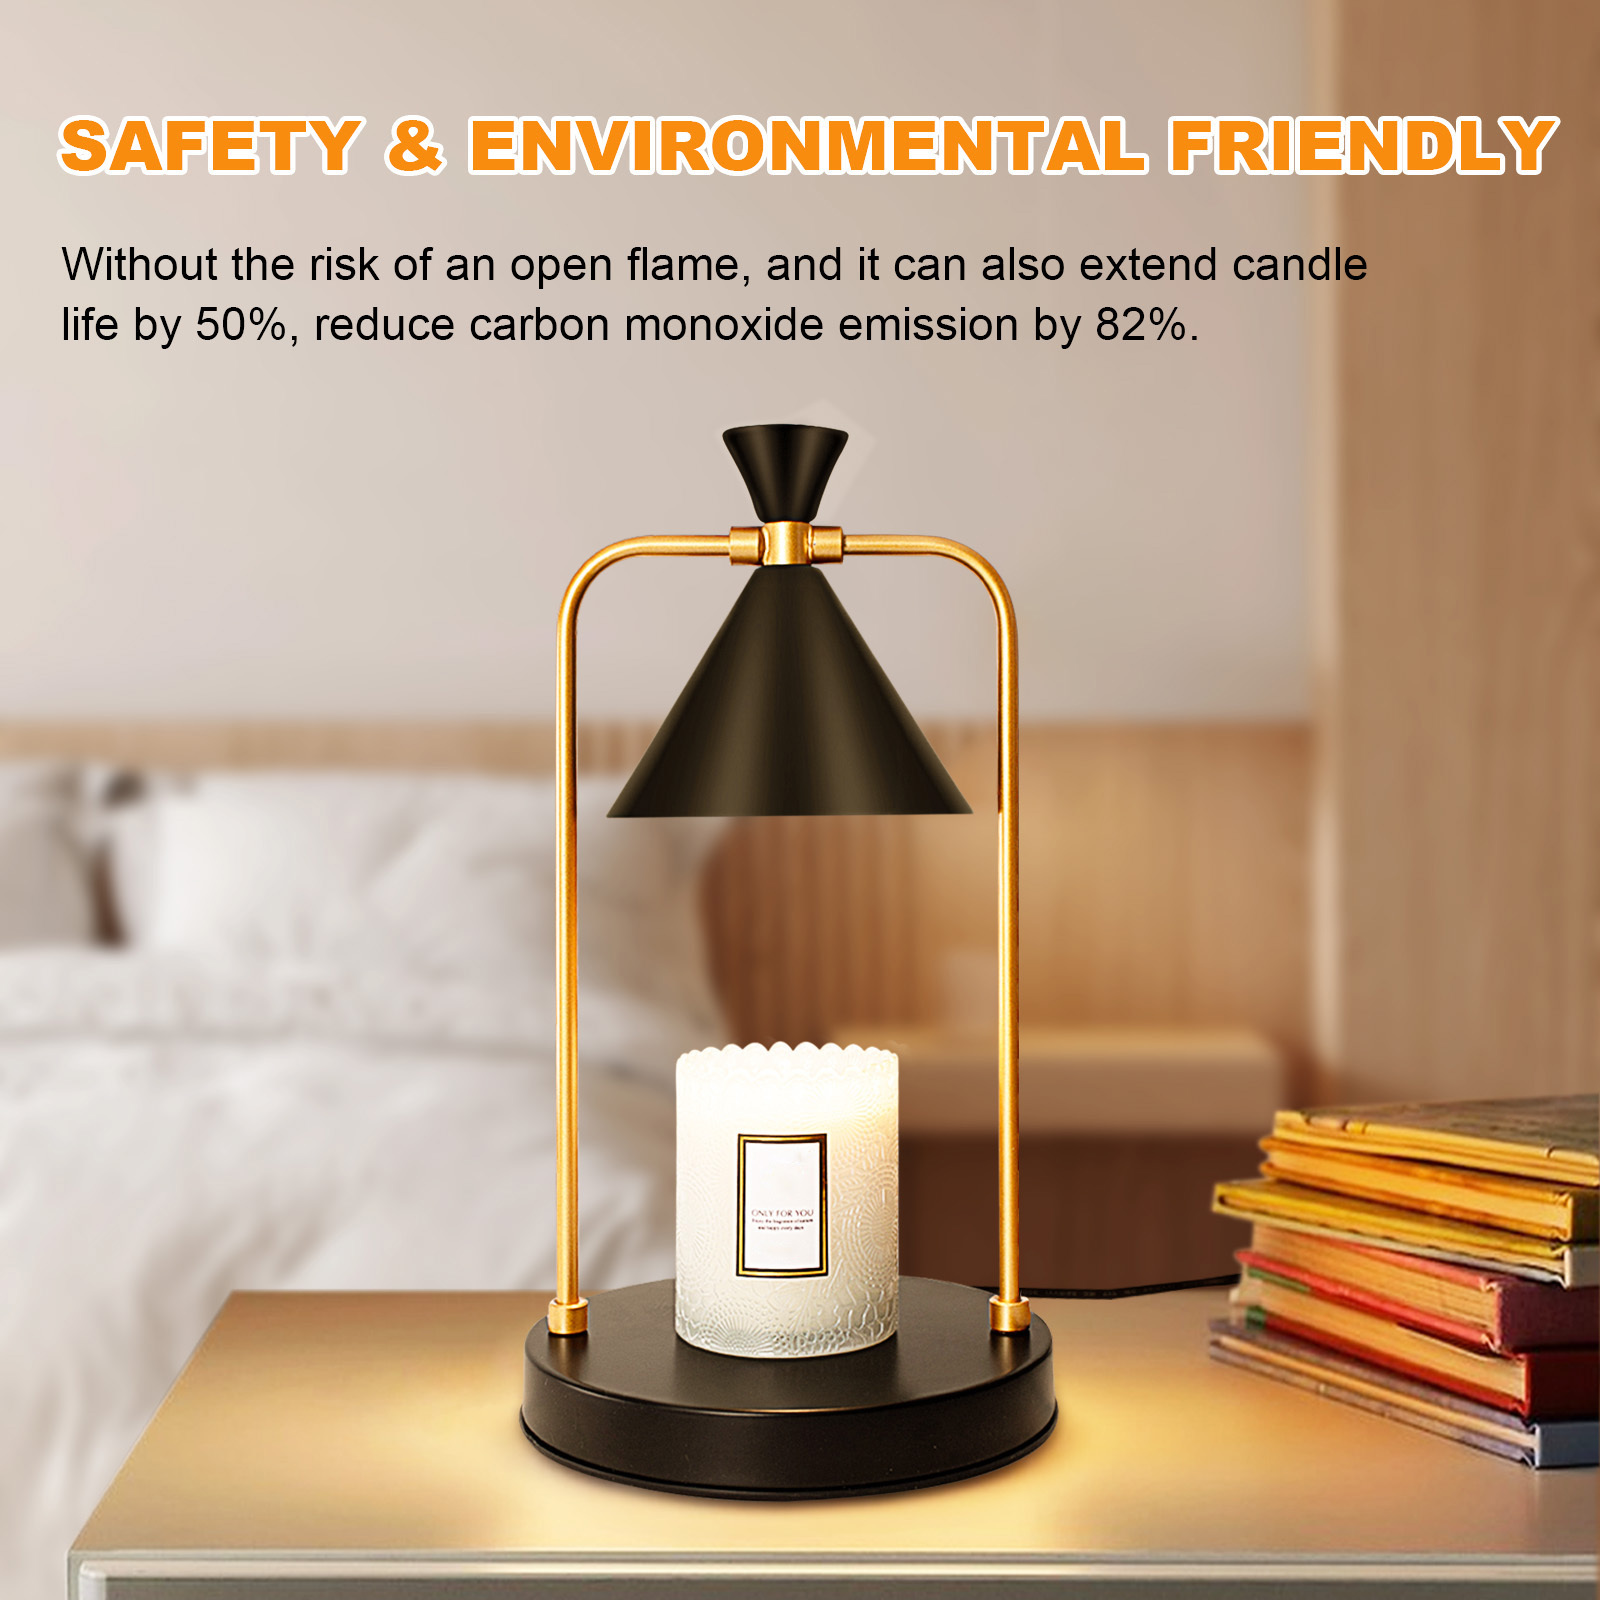 Elegant Design of the Electric Candle Warmer Lamp